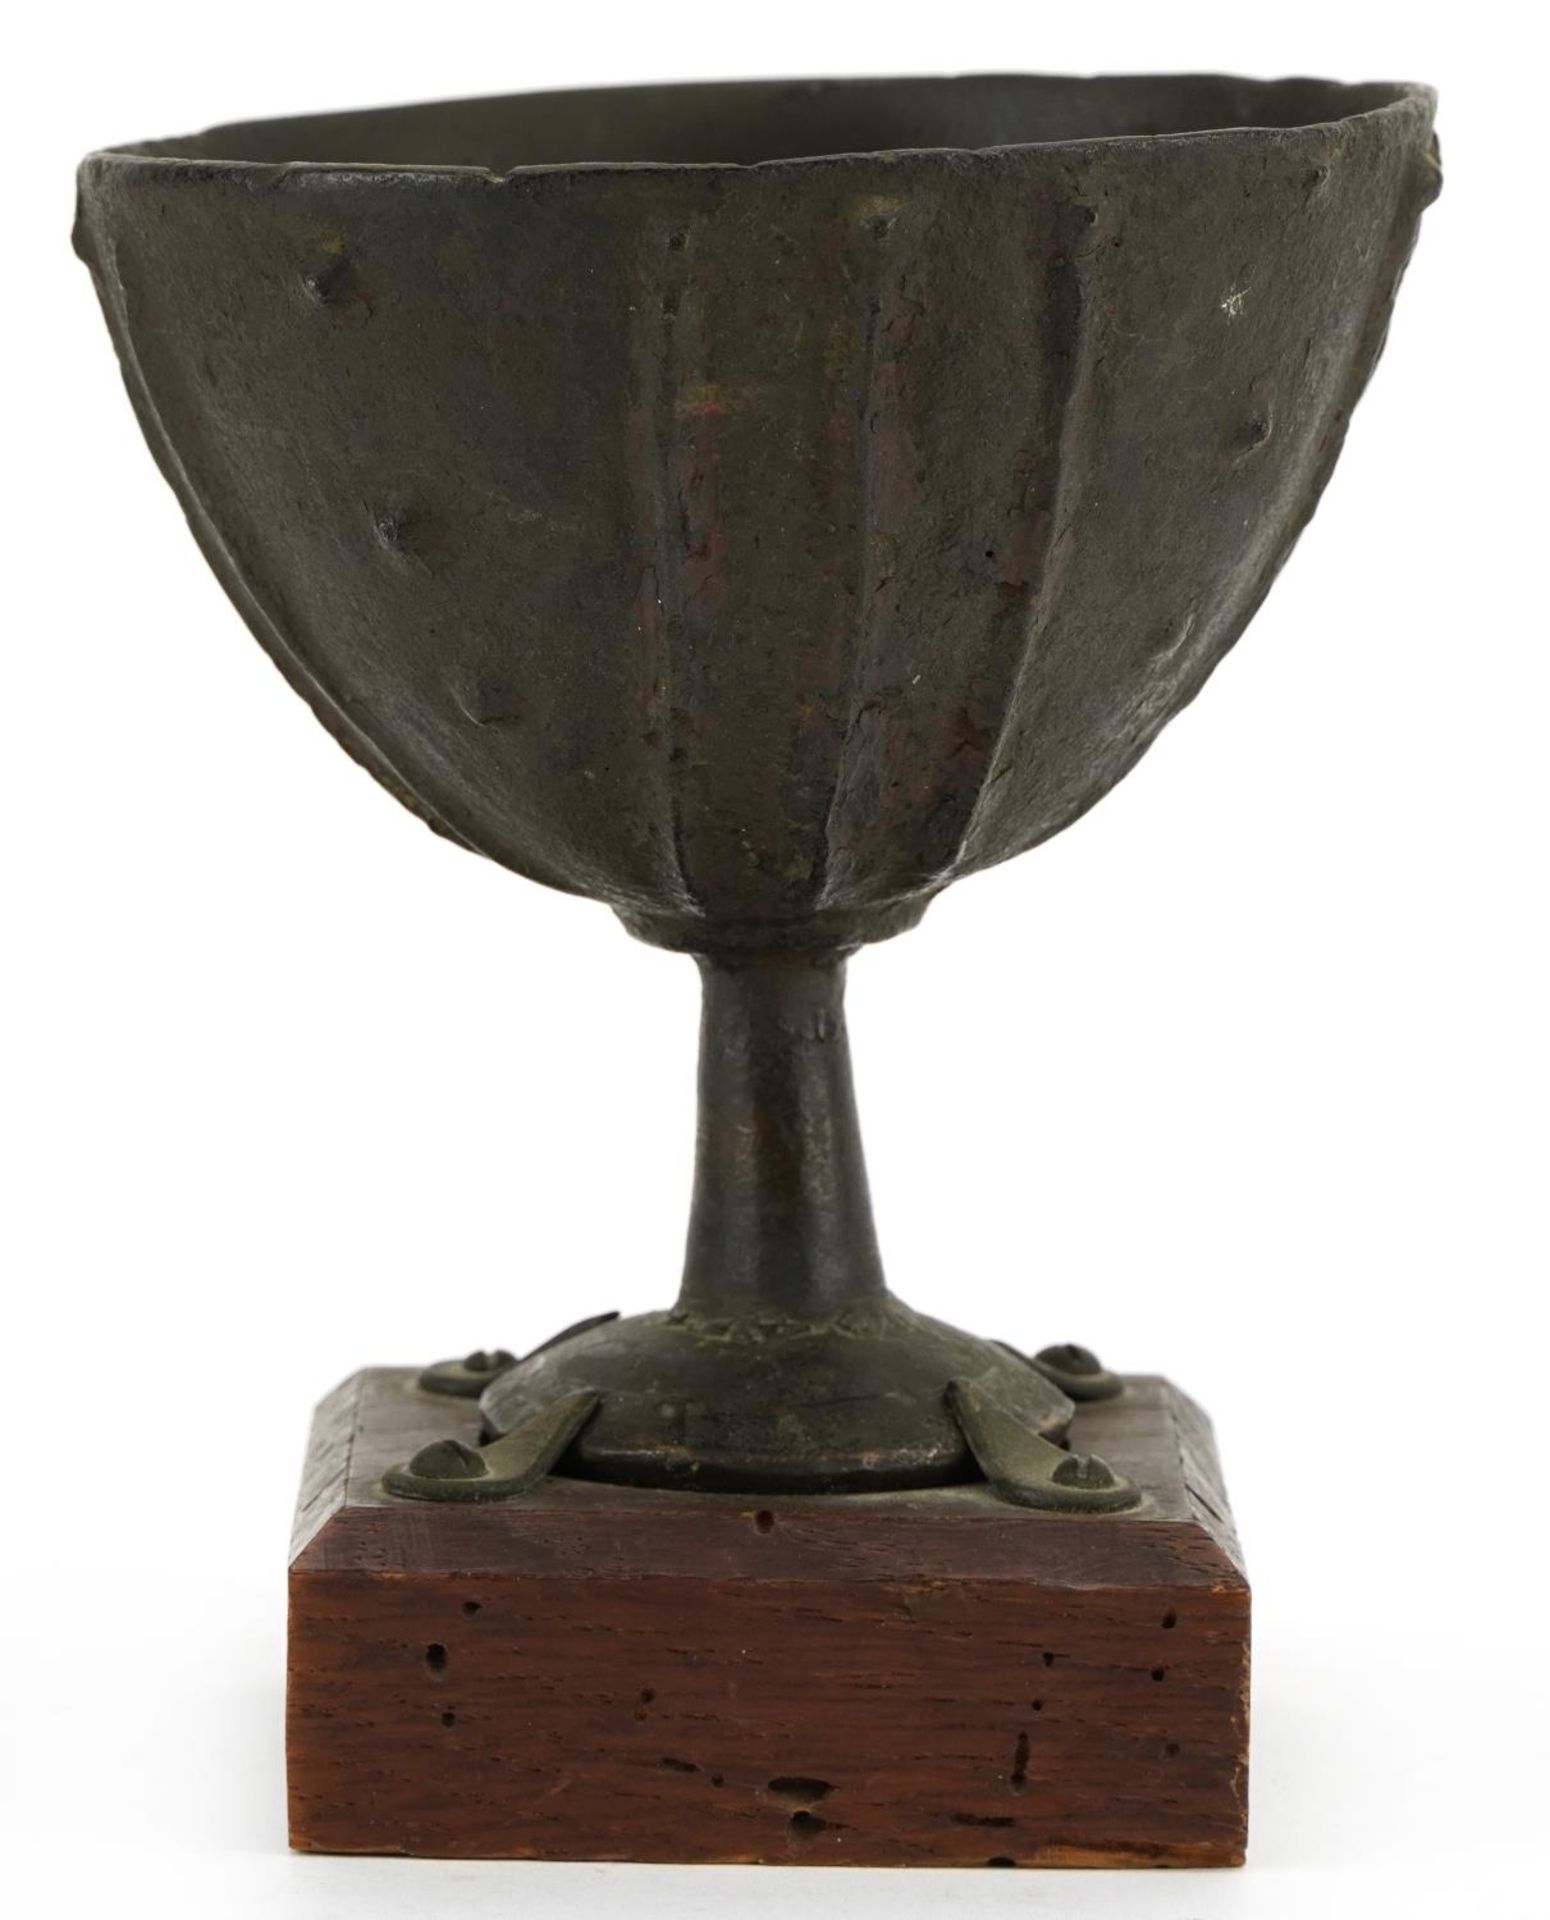 Antique lacquered bronze Etruscan chalice, collection mark to the base, inscribed C58, raised on a